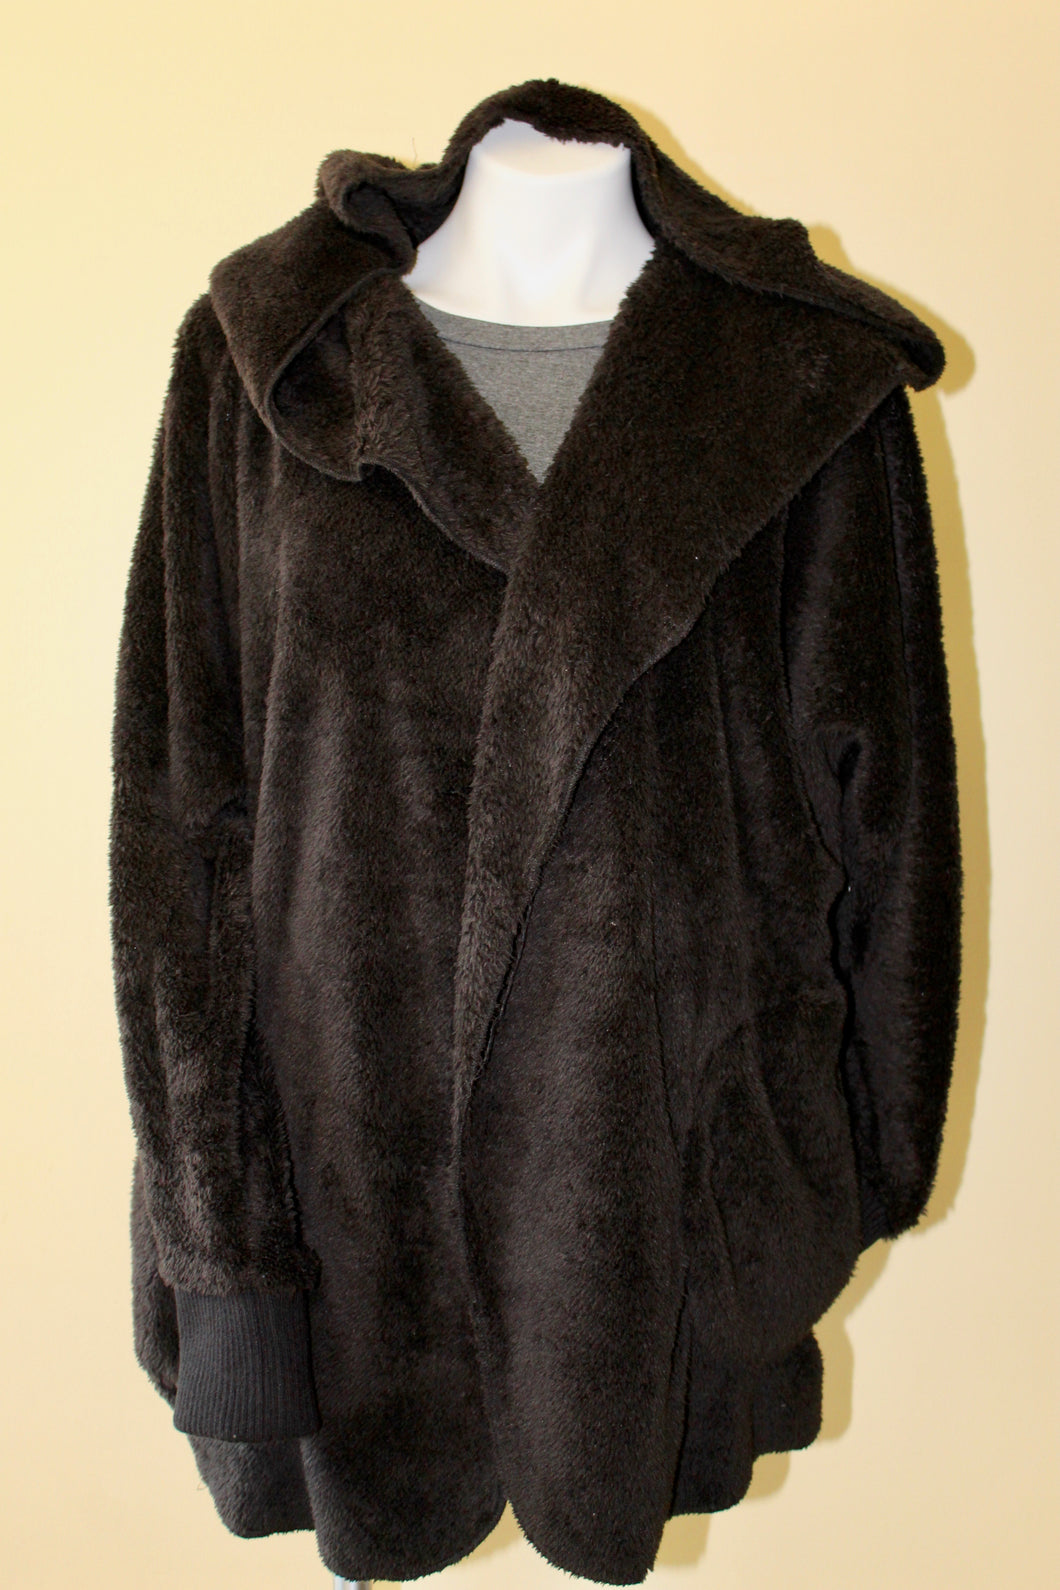 New Arrival --- Black Faux Fur Plush Hooded Teddy Jacket with Pockets